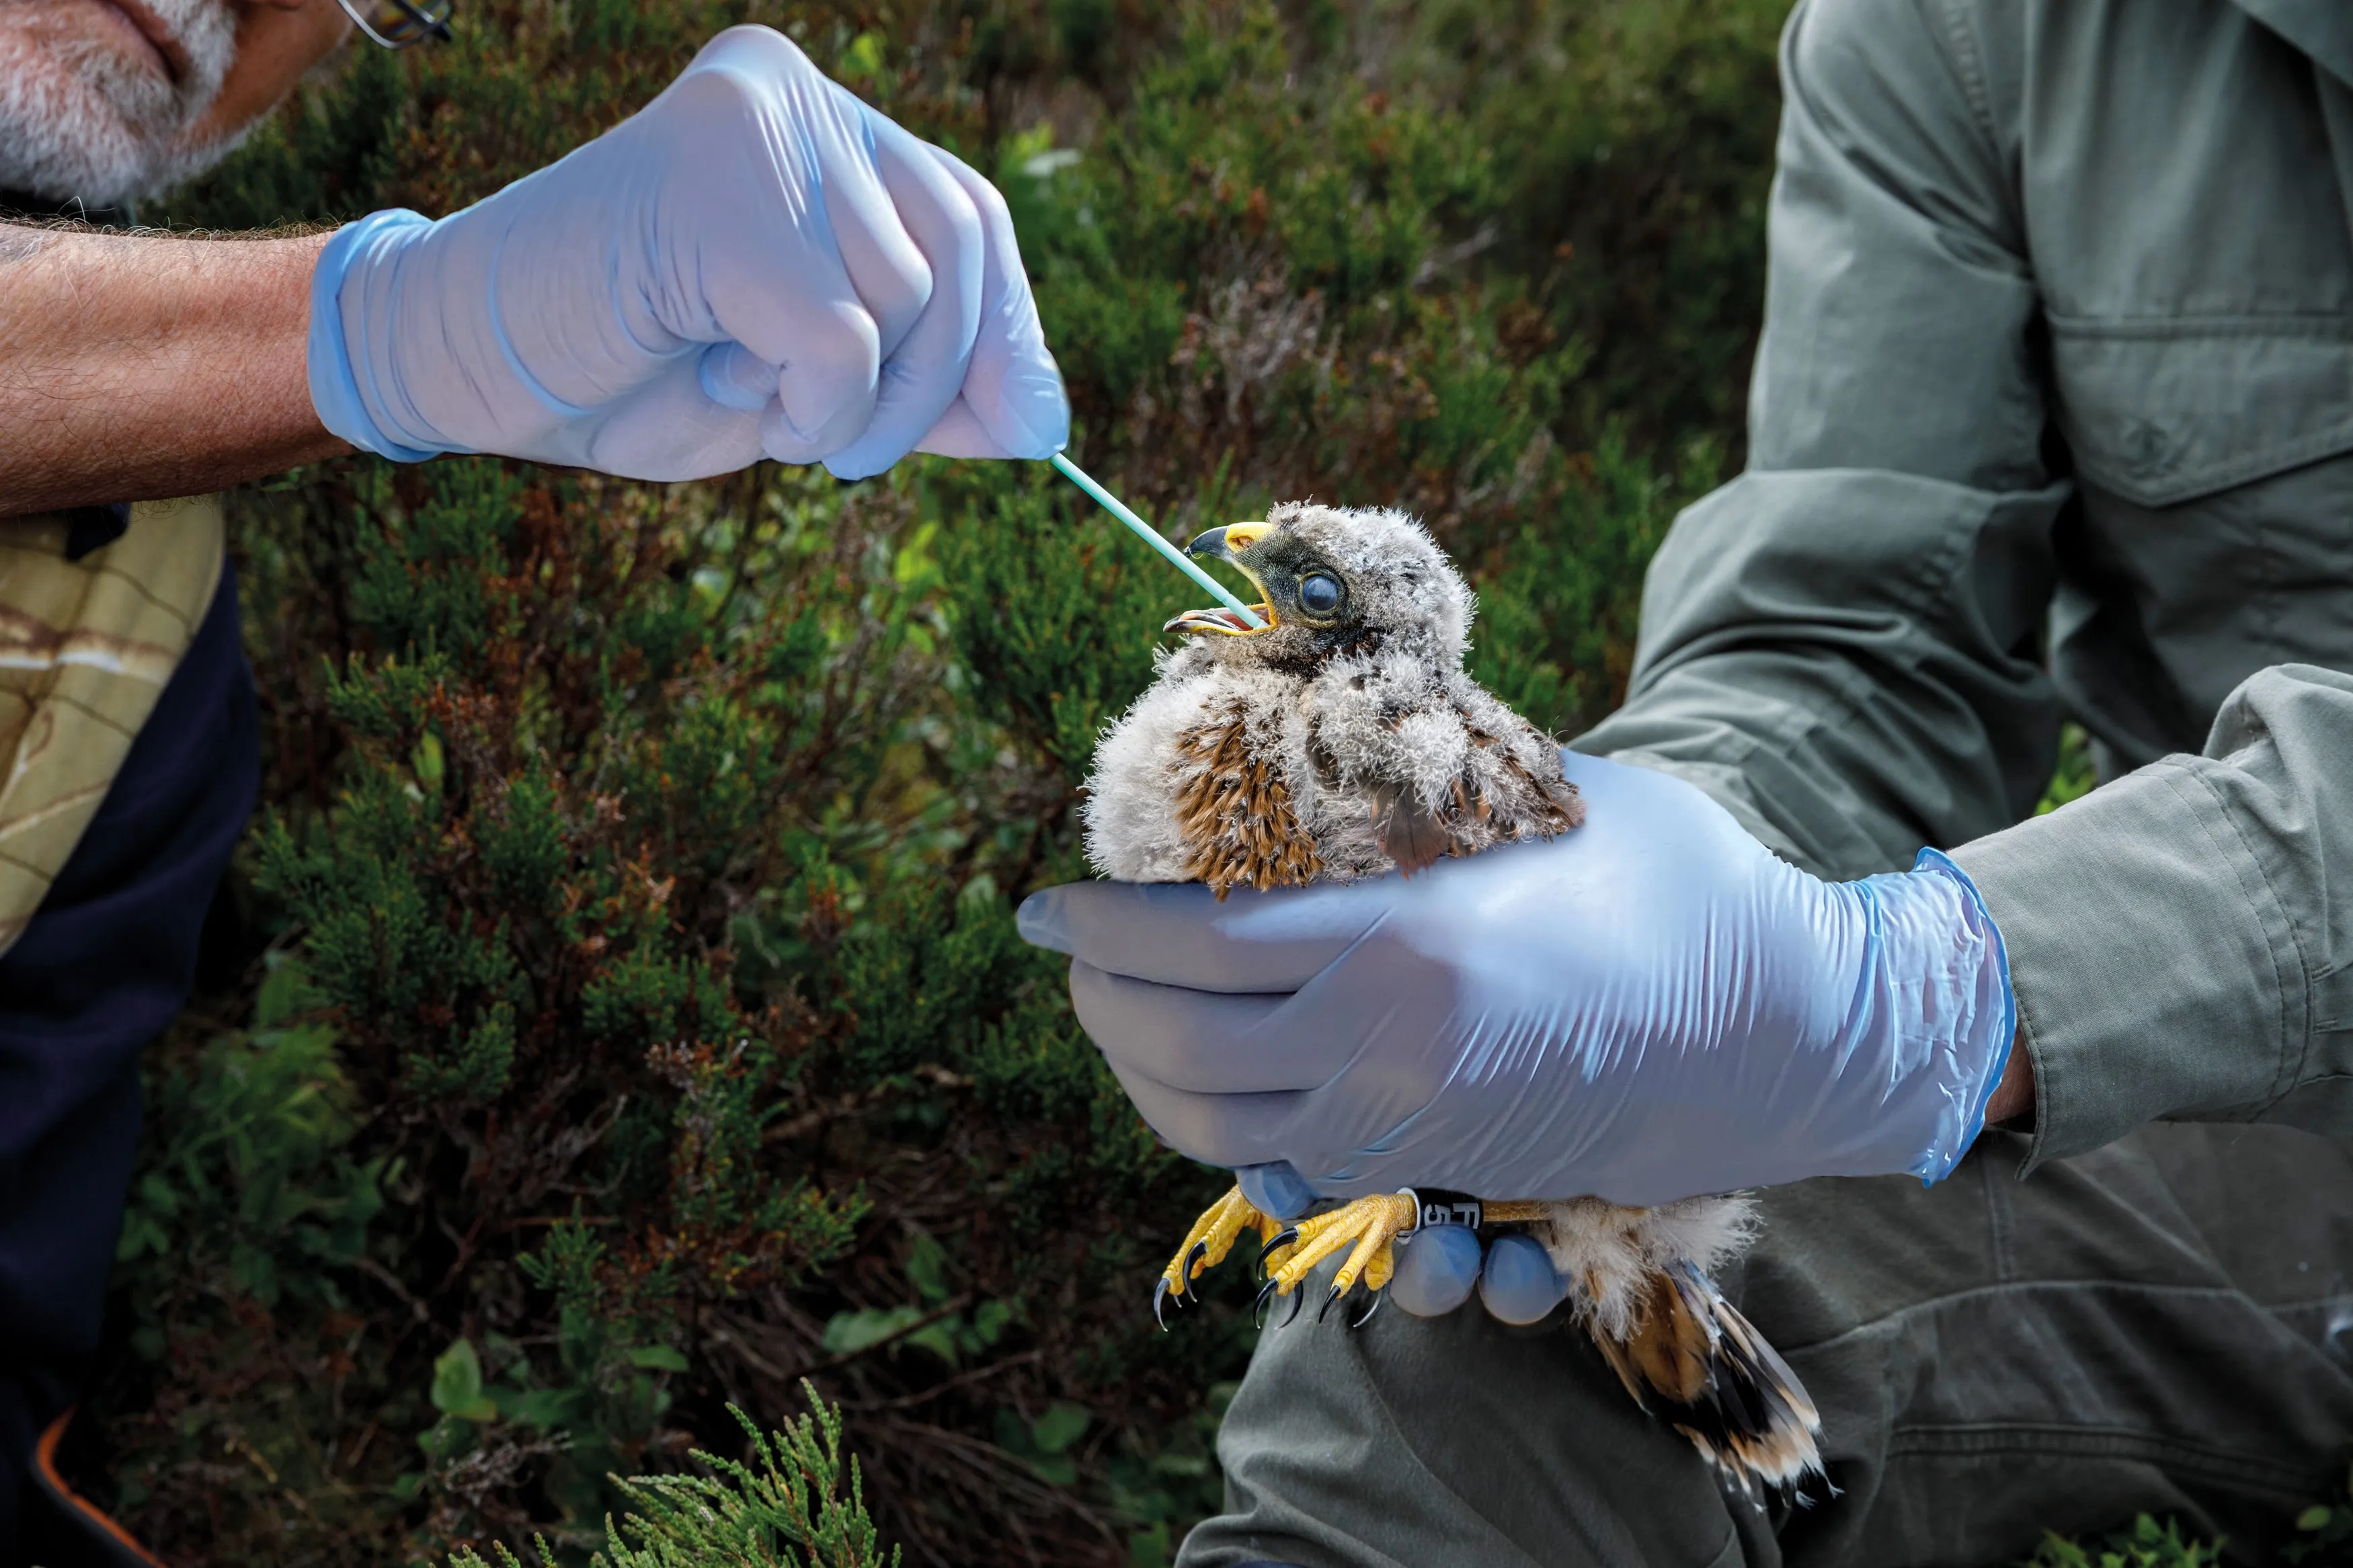 Hands with blue protective gloves covering them, one pair holding a Hen Harrier chick and one holding a cotton swab in the chick's mouth